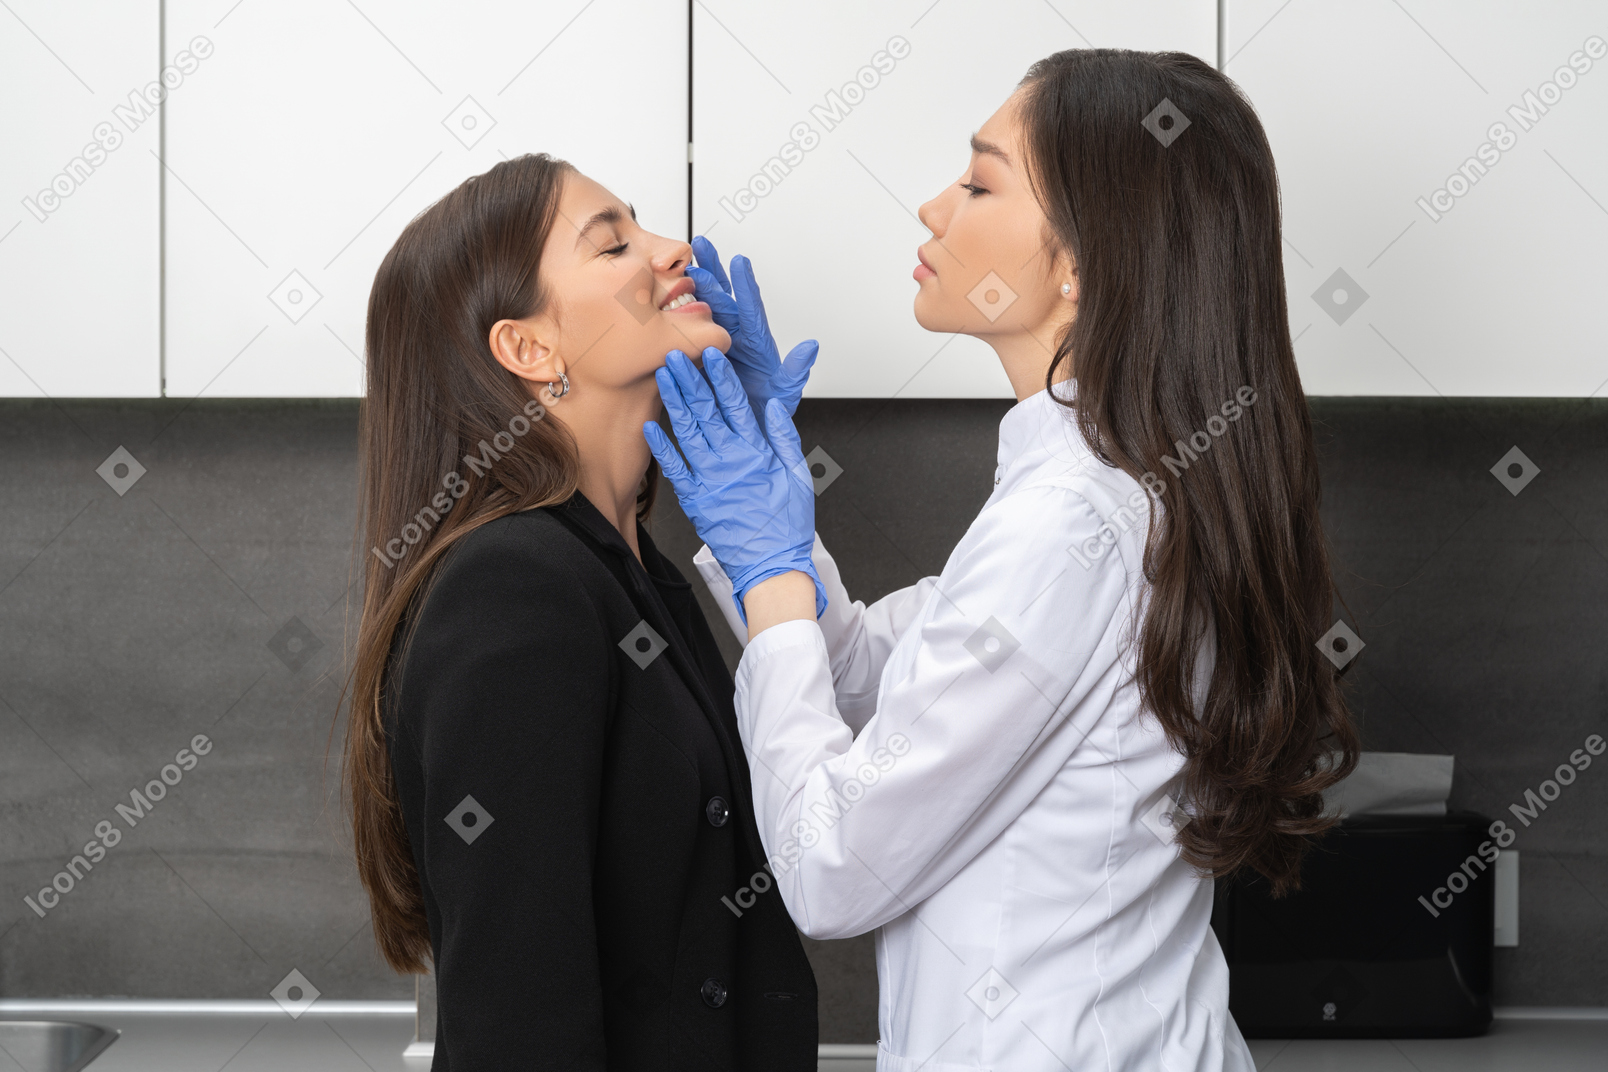 Female doctor examining patient's mouth